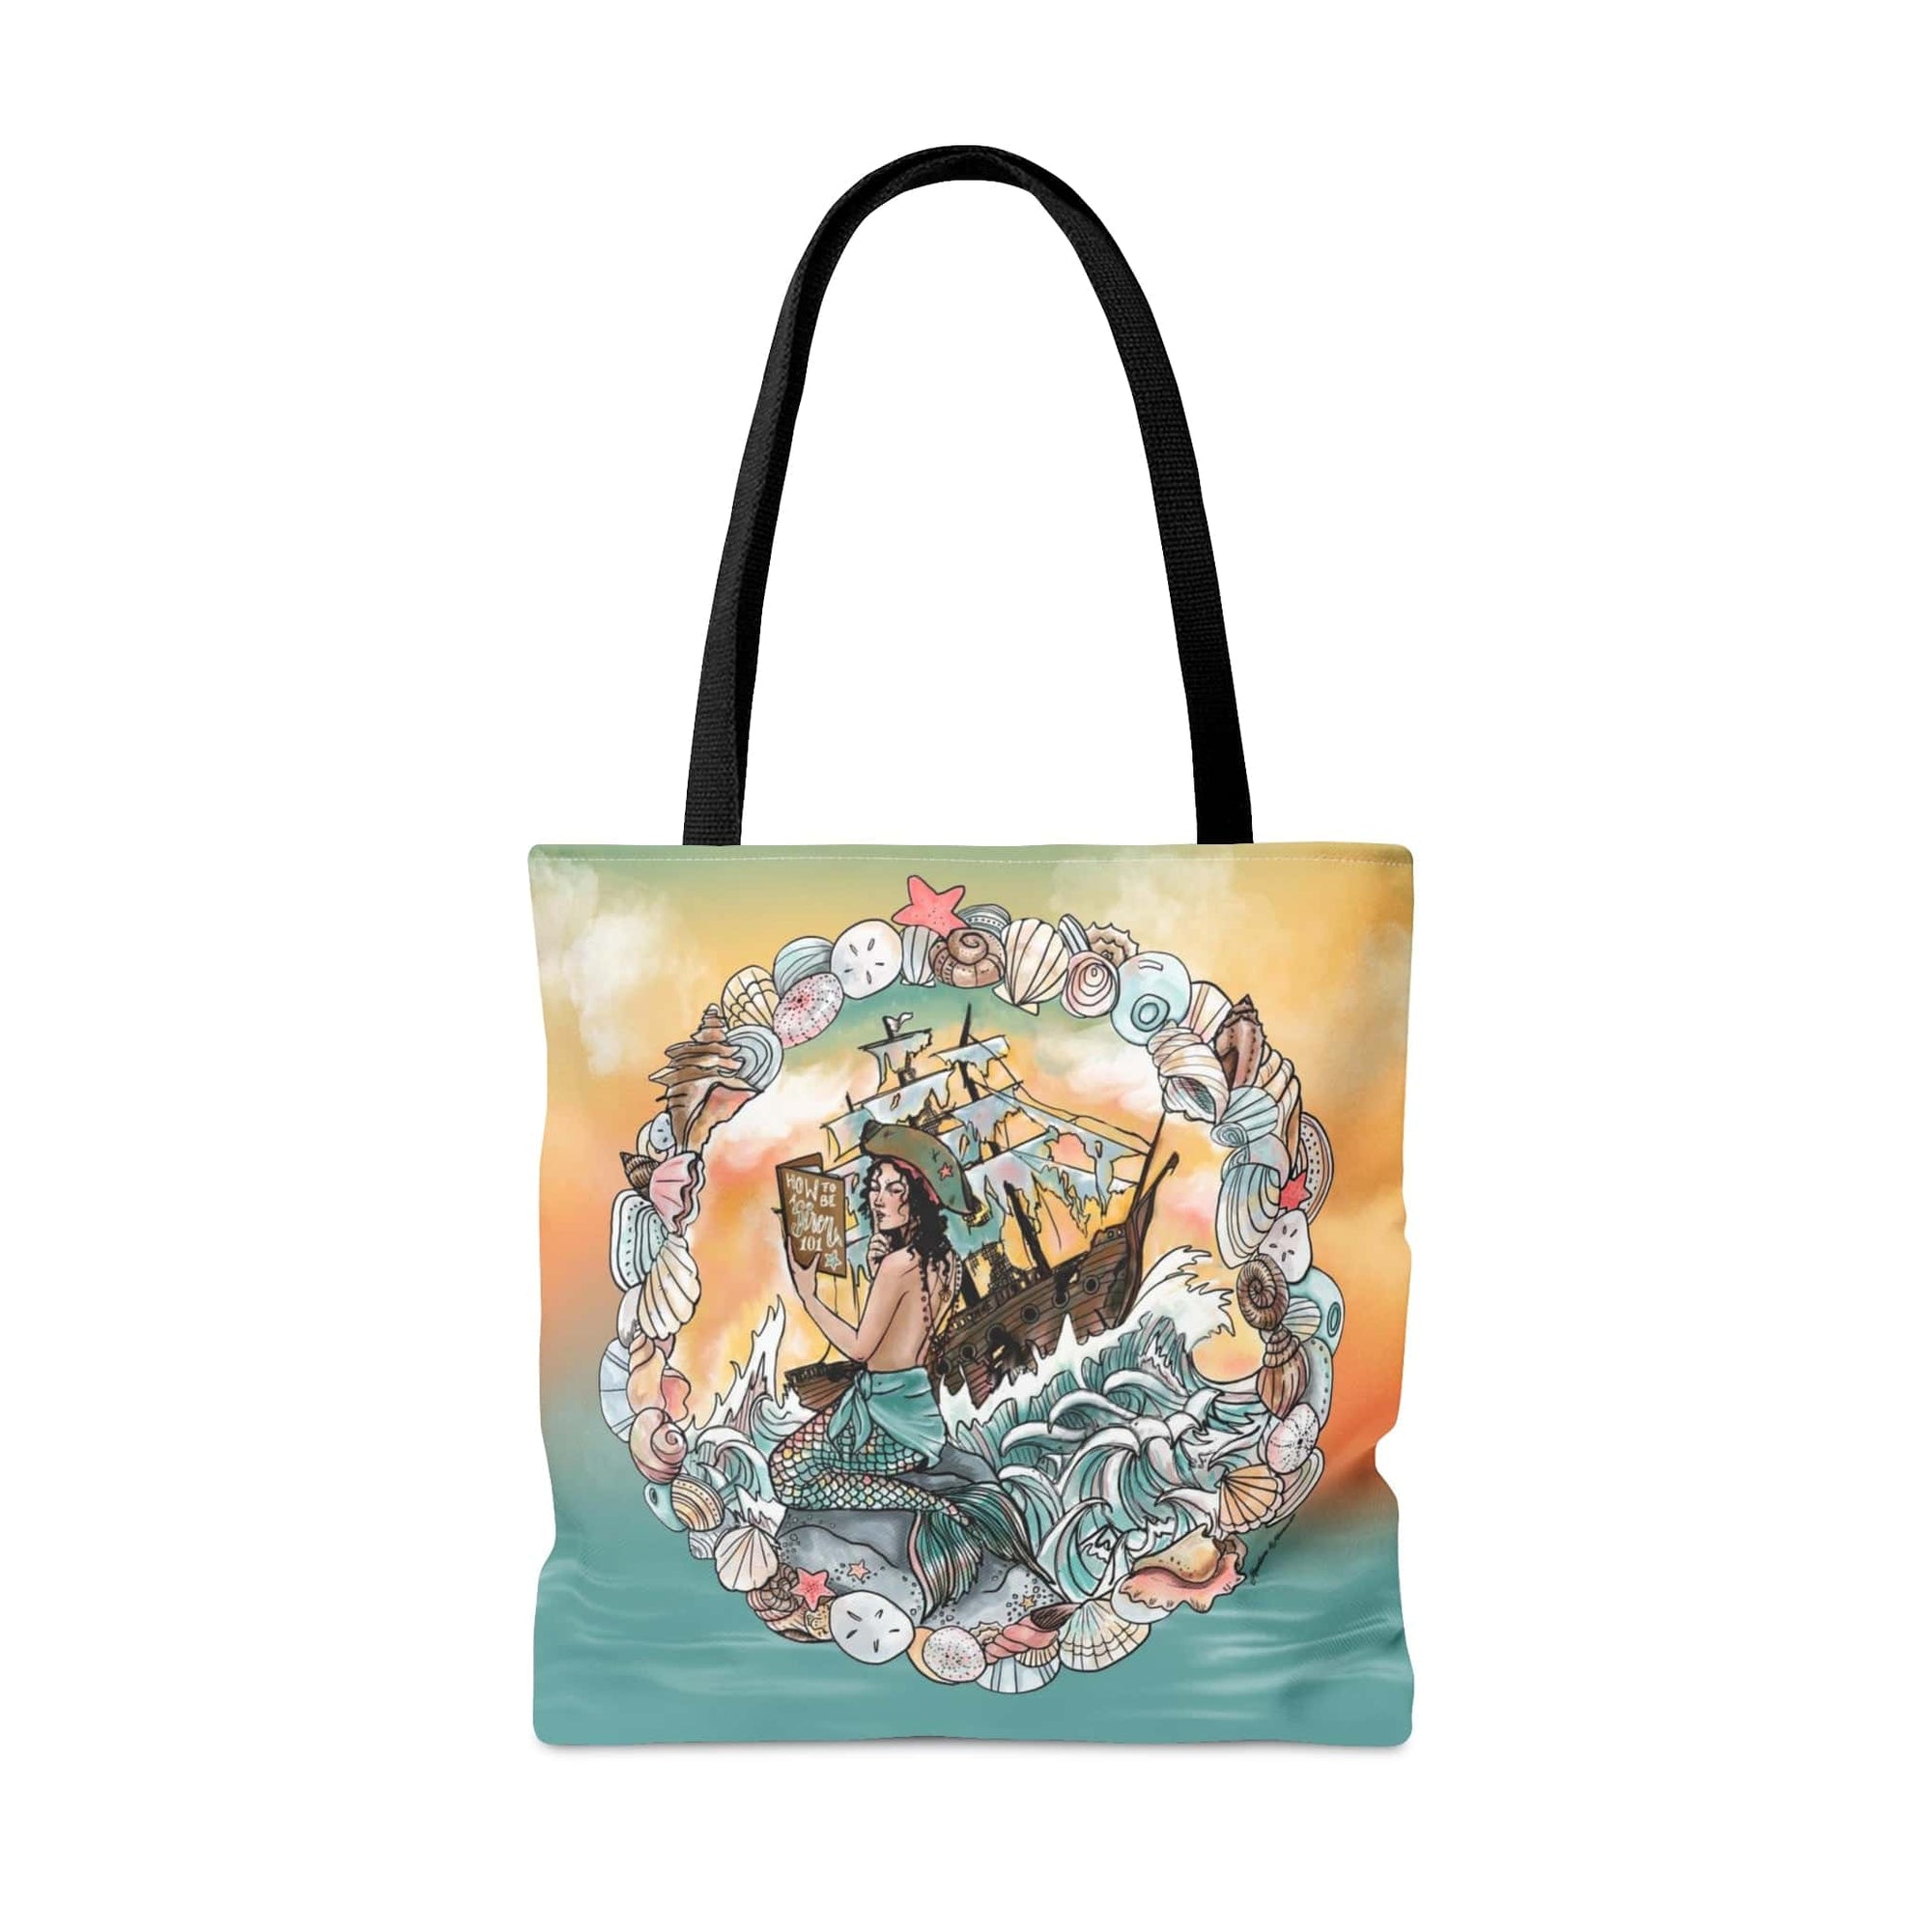 How To Be A Siren 101 Tote Bag - Mountains & Mermaids